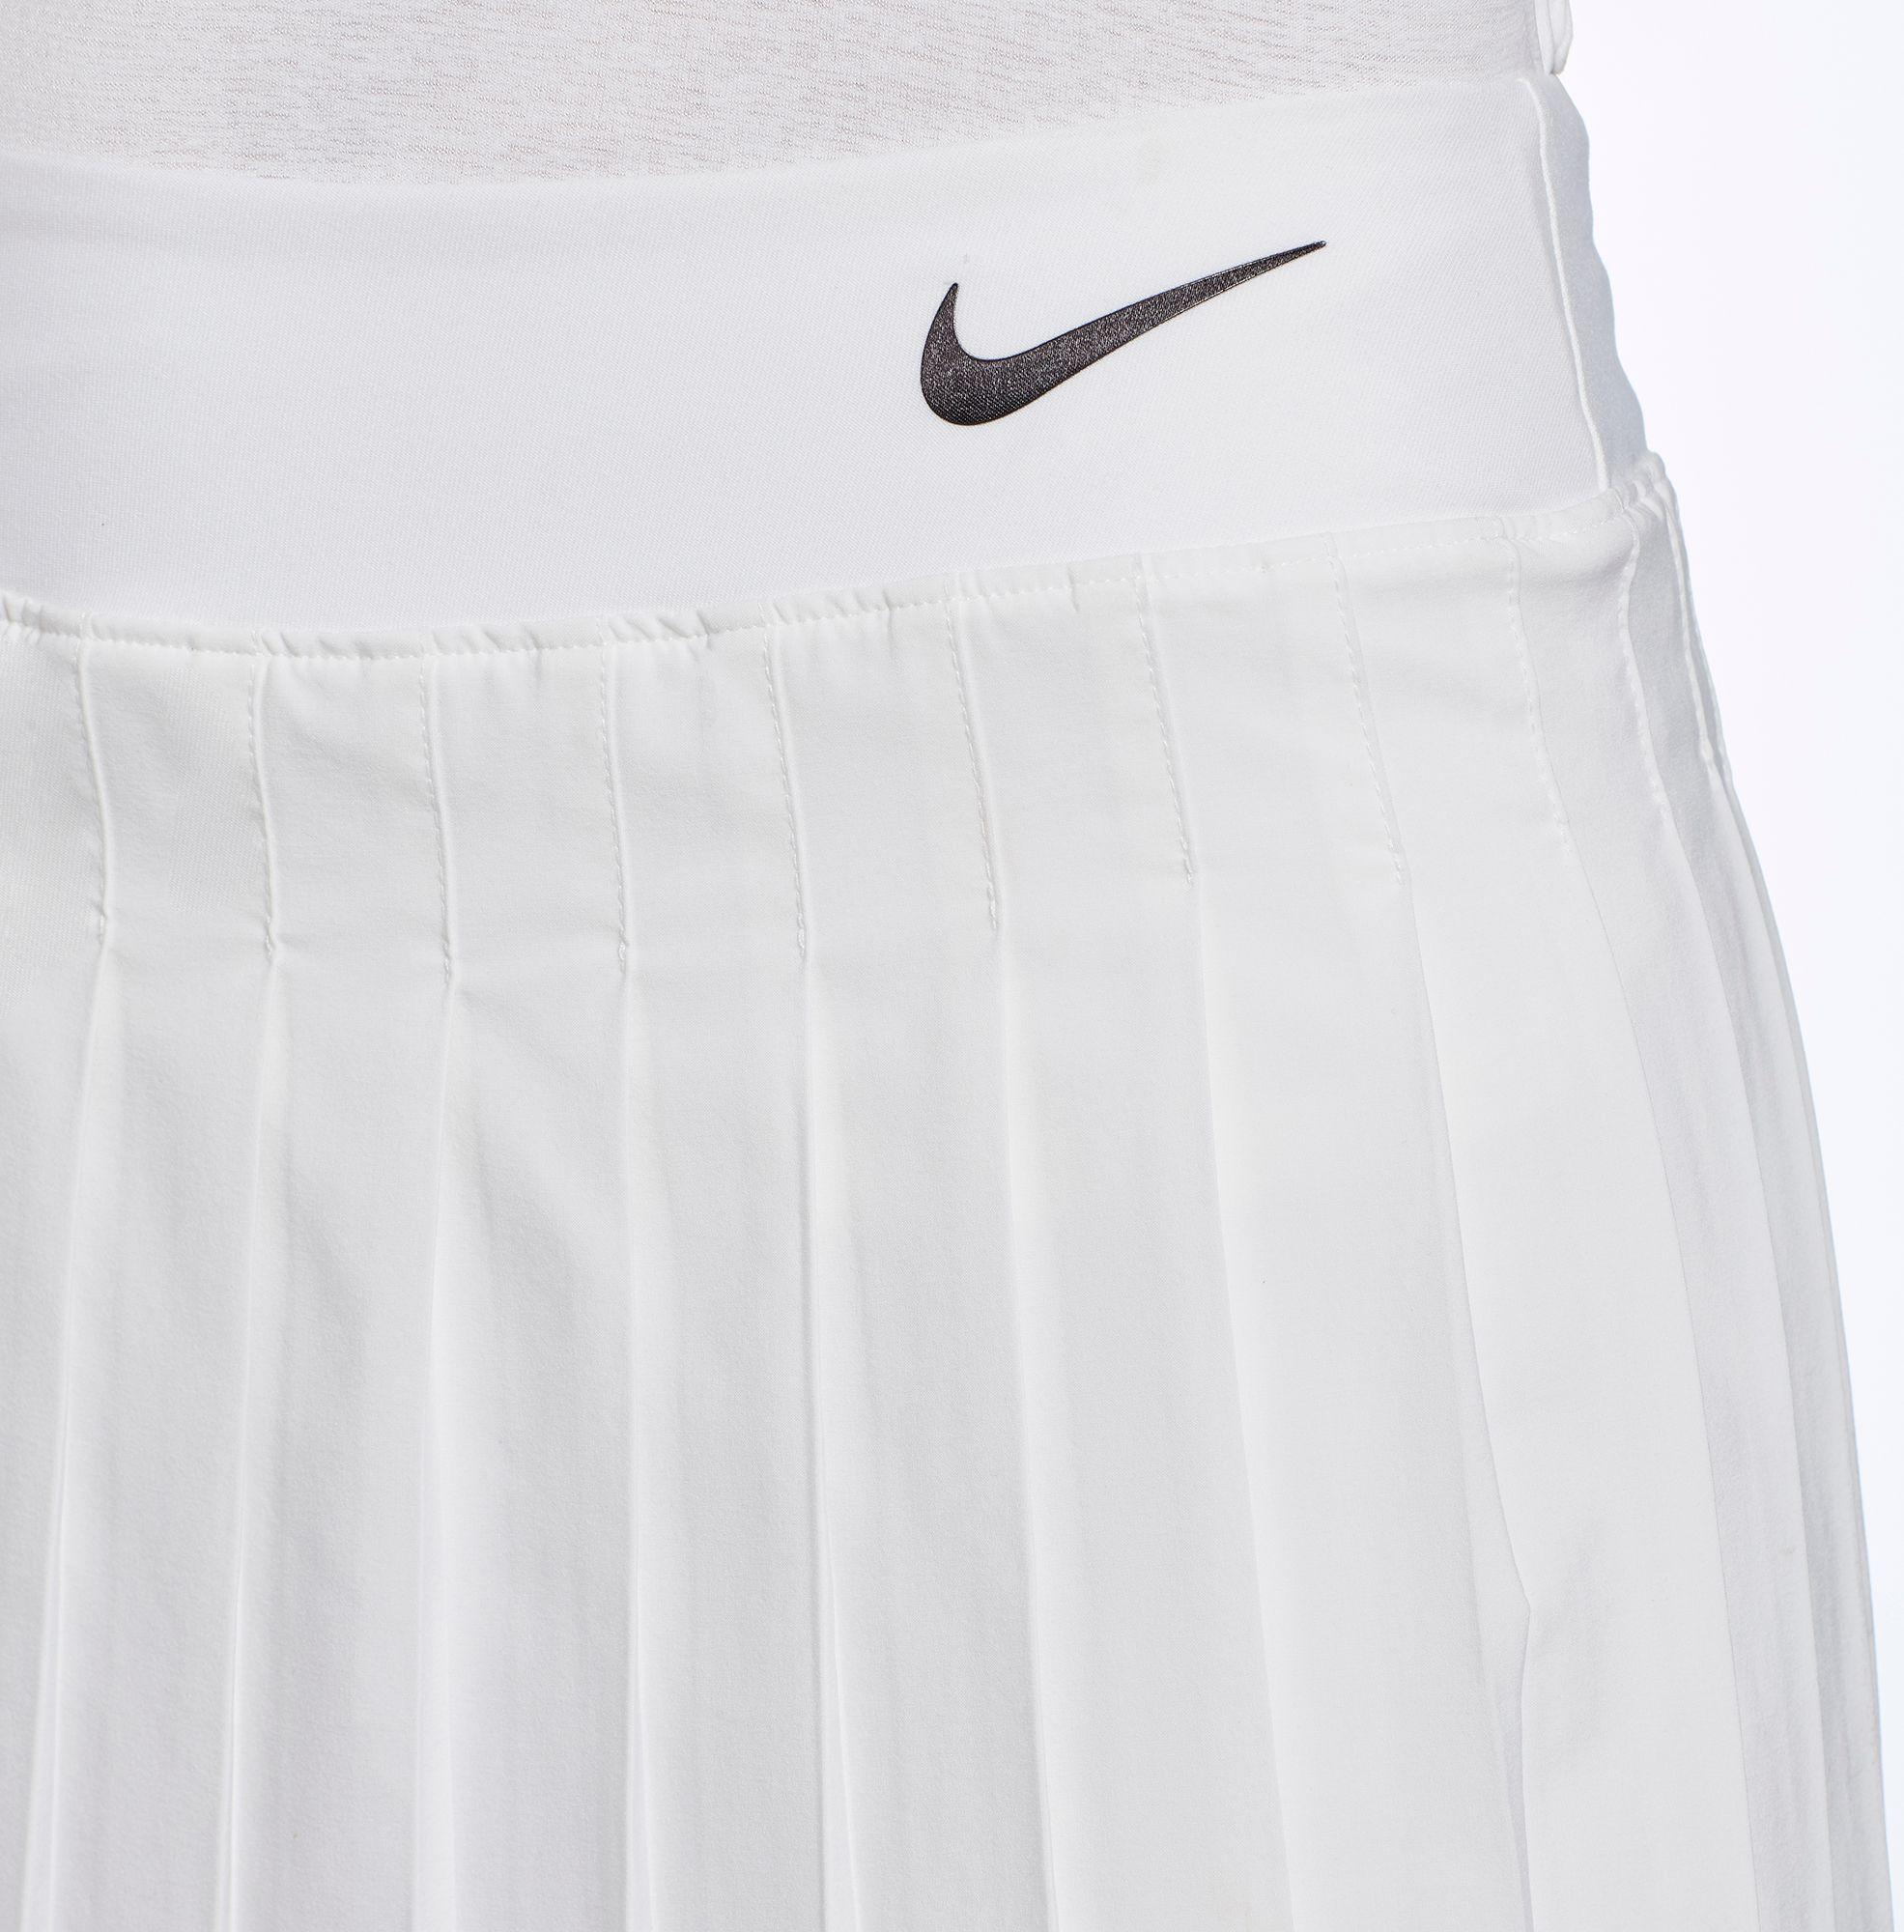 nike women's court victory wide band tennis skirt